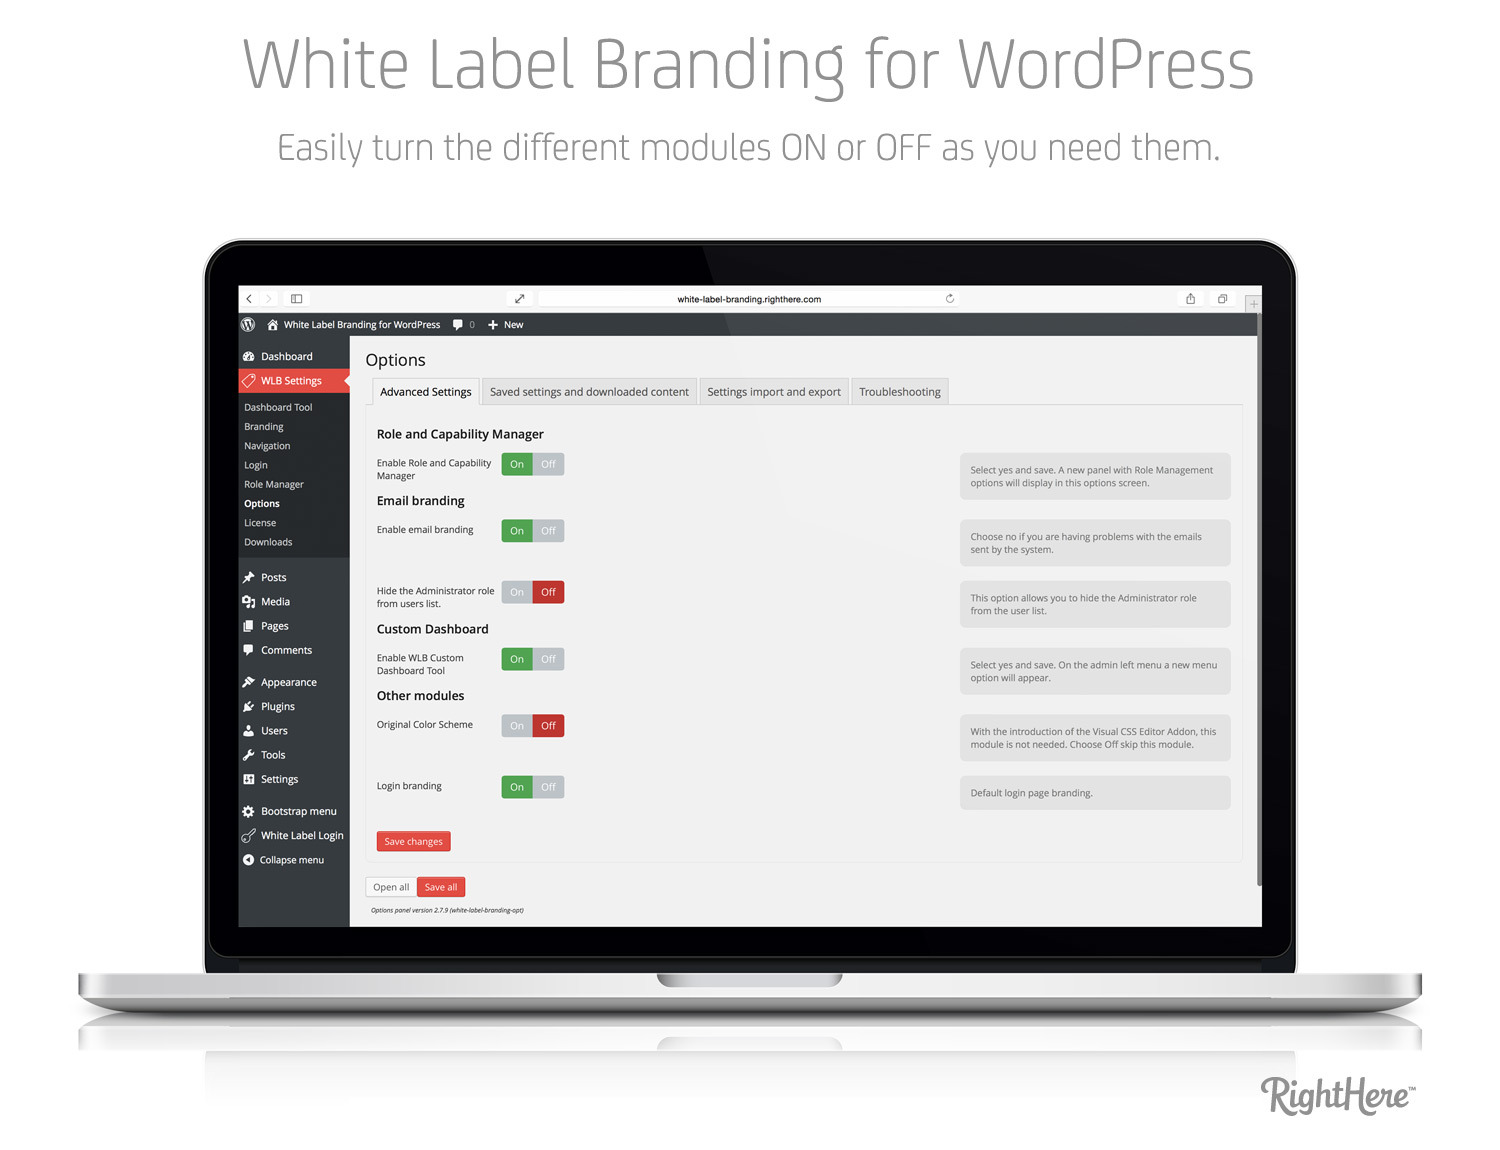 Example of custom login page back end using white label branding for wordpress